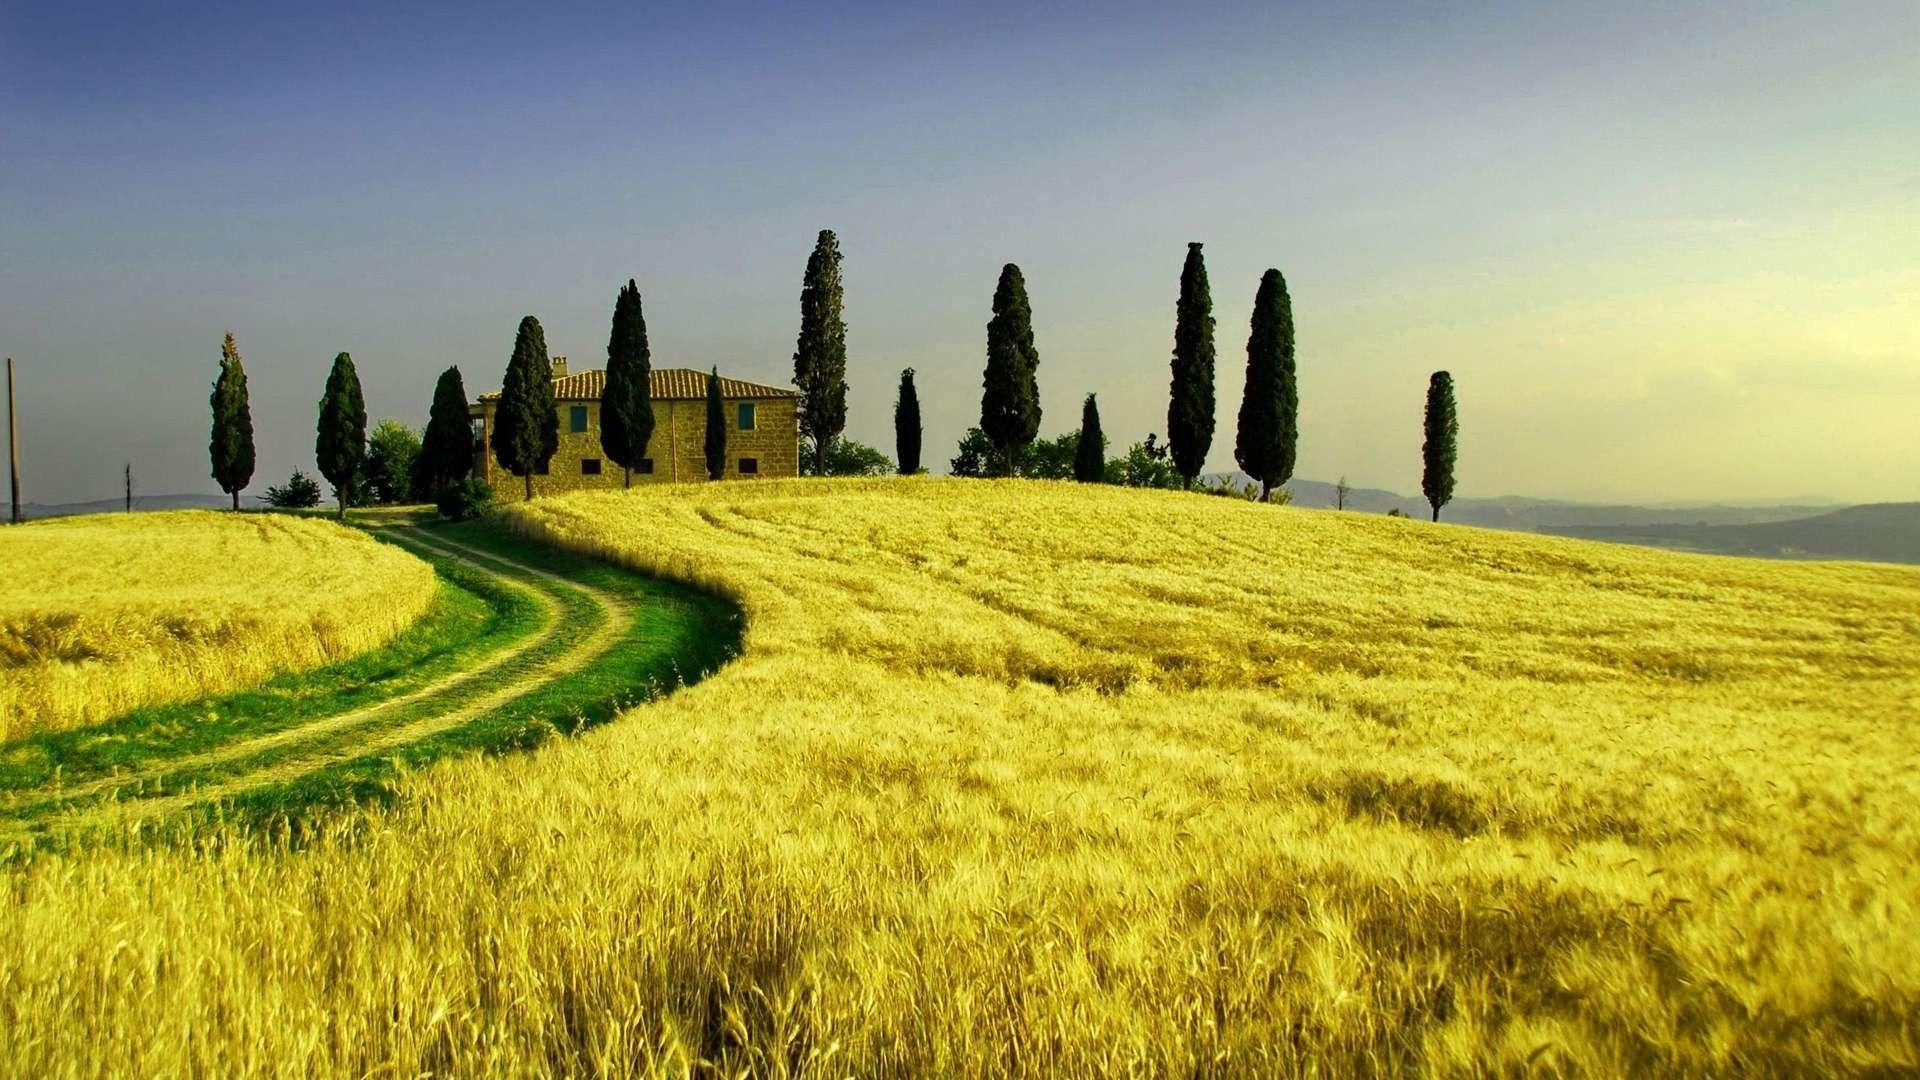 Best Tuscany Wallpapers on HipWallpapers